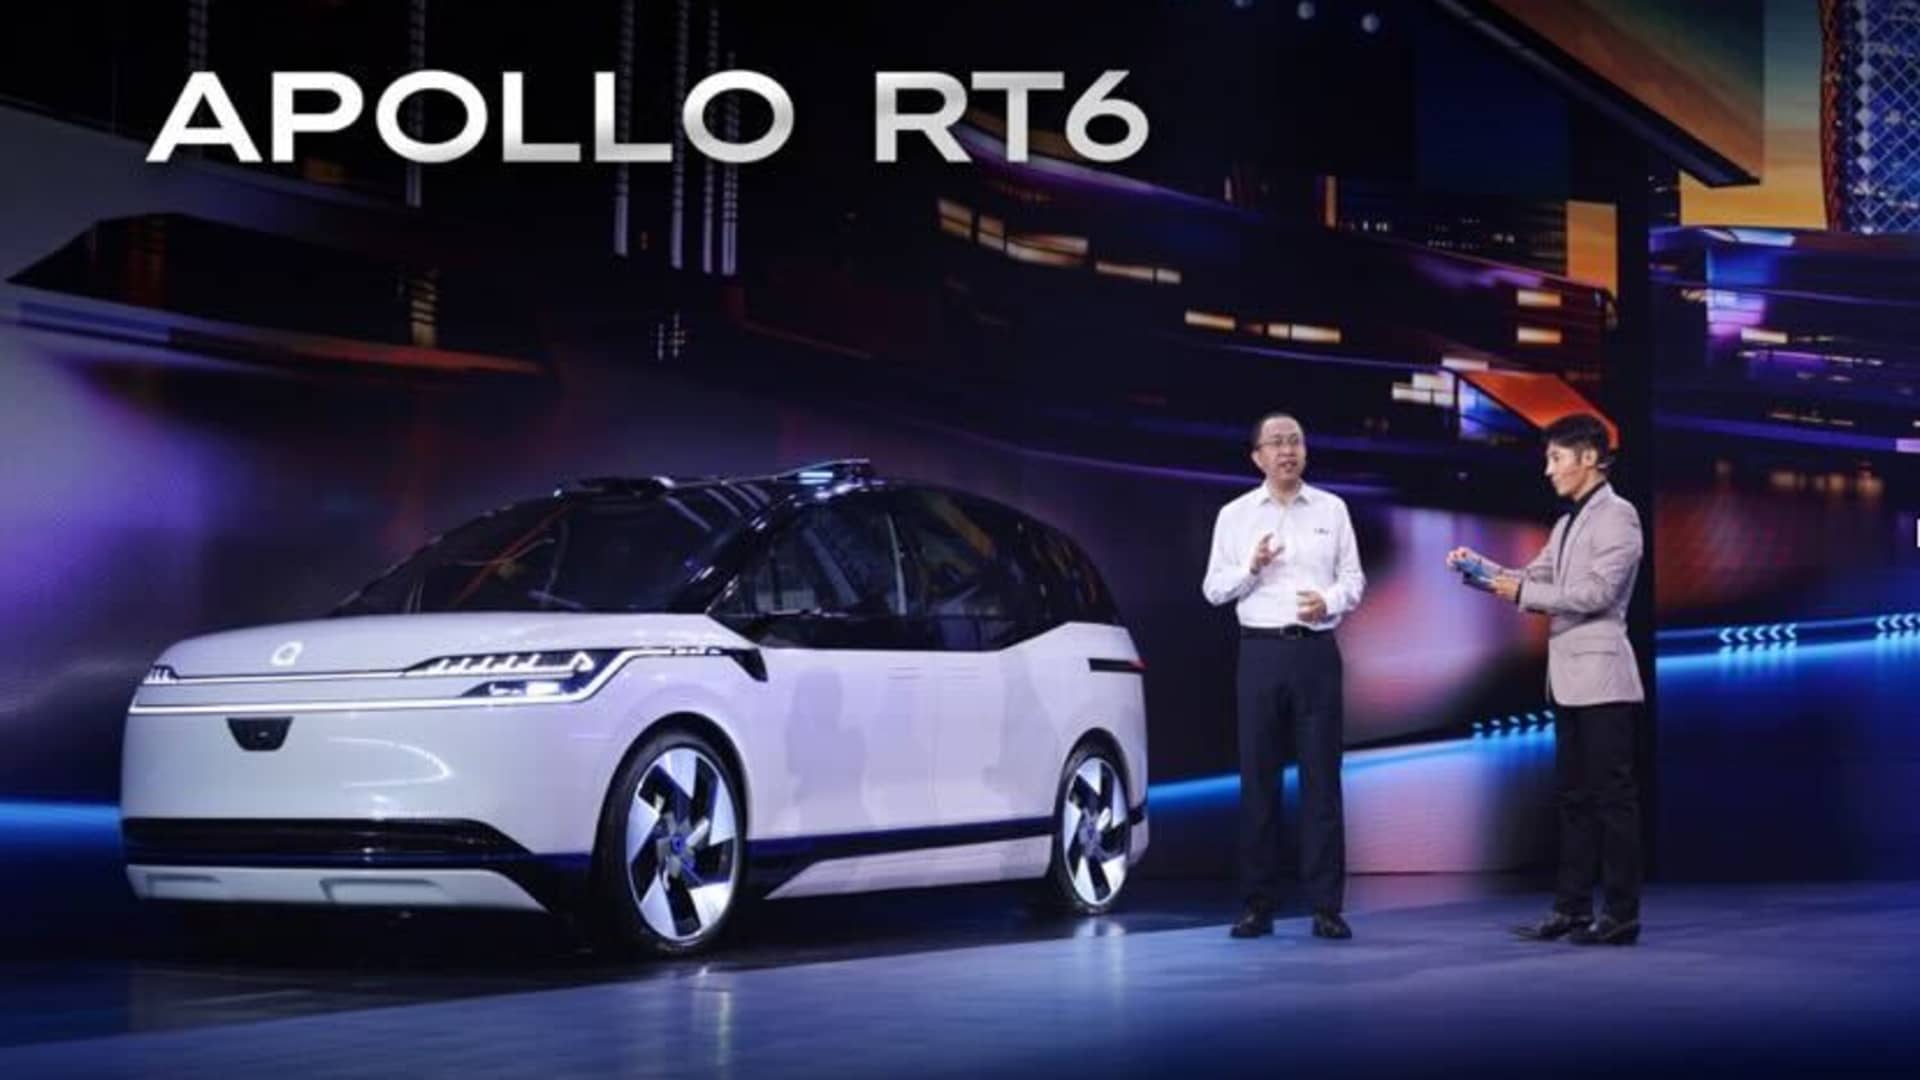 Baidu’s robotaxi can drive without a steering wheel, car price slashed